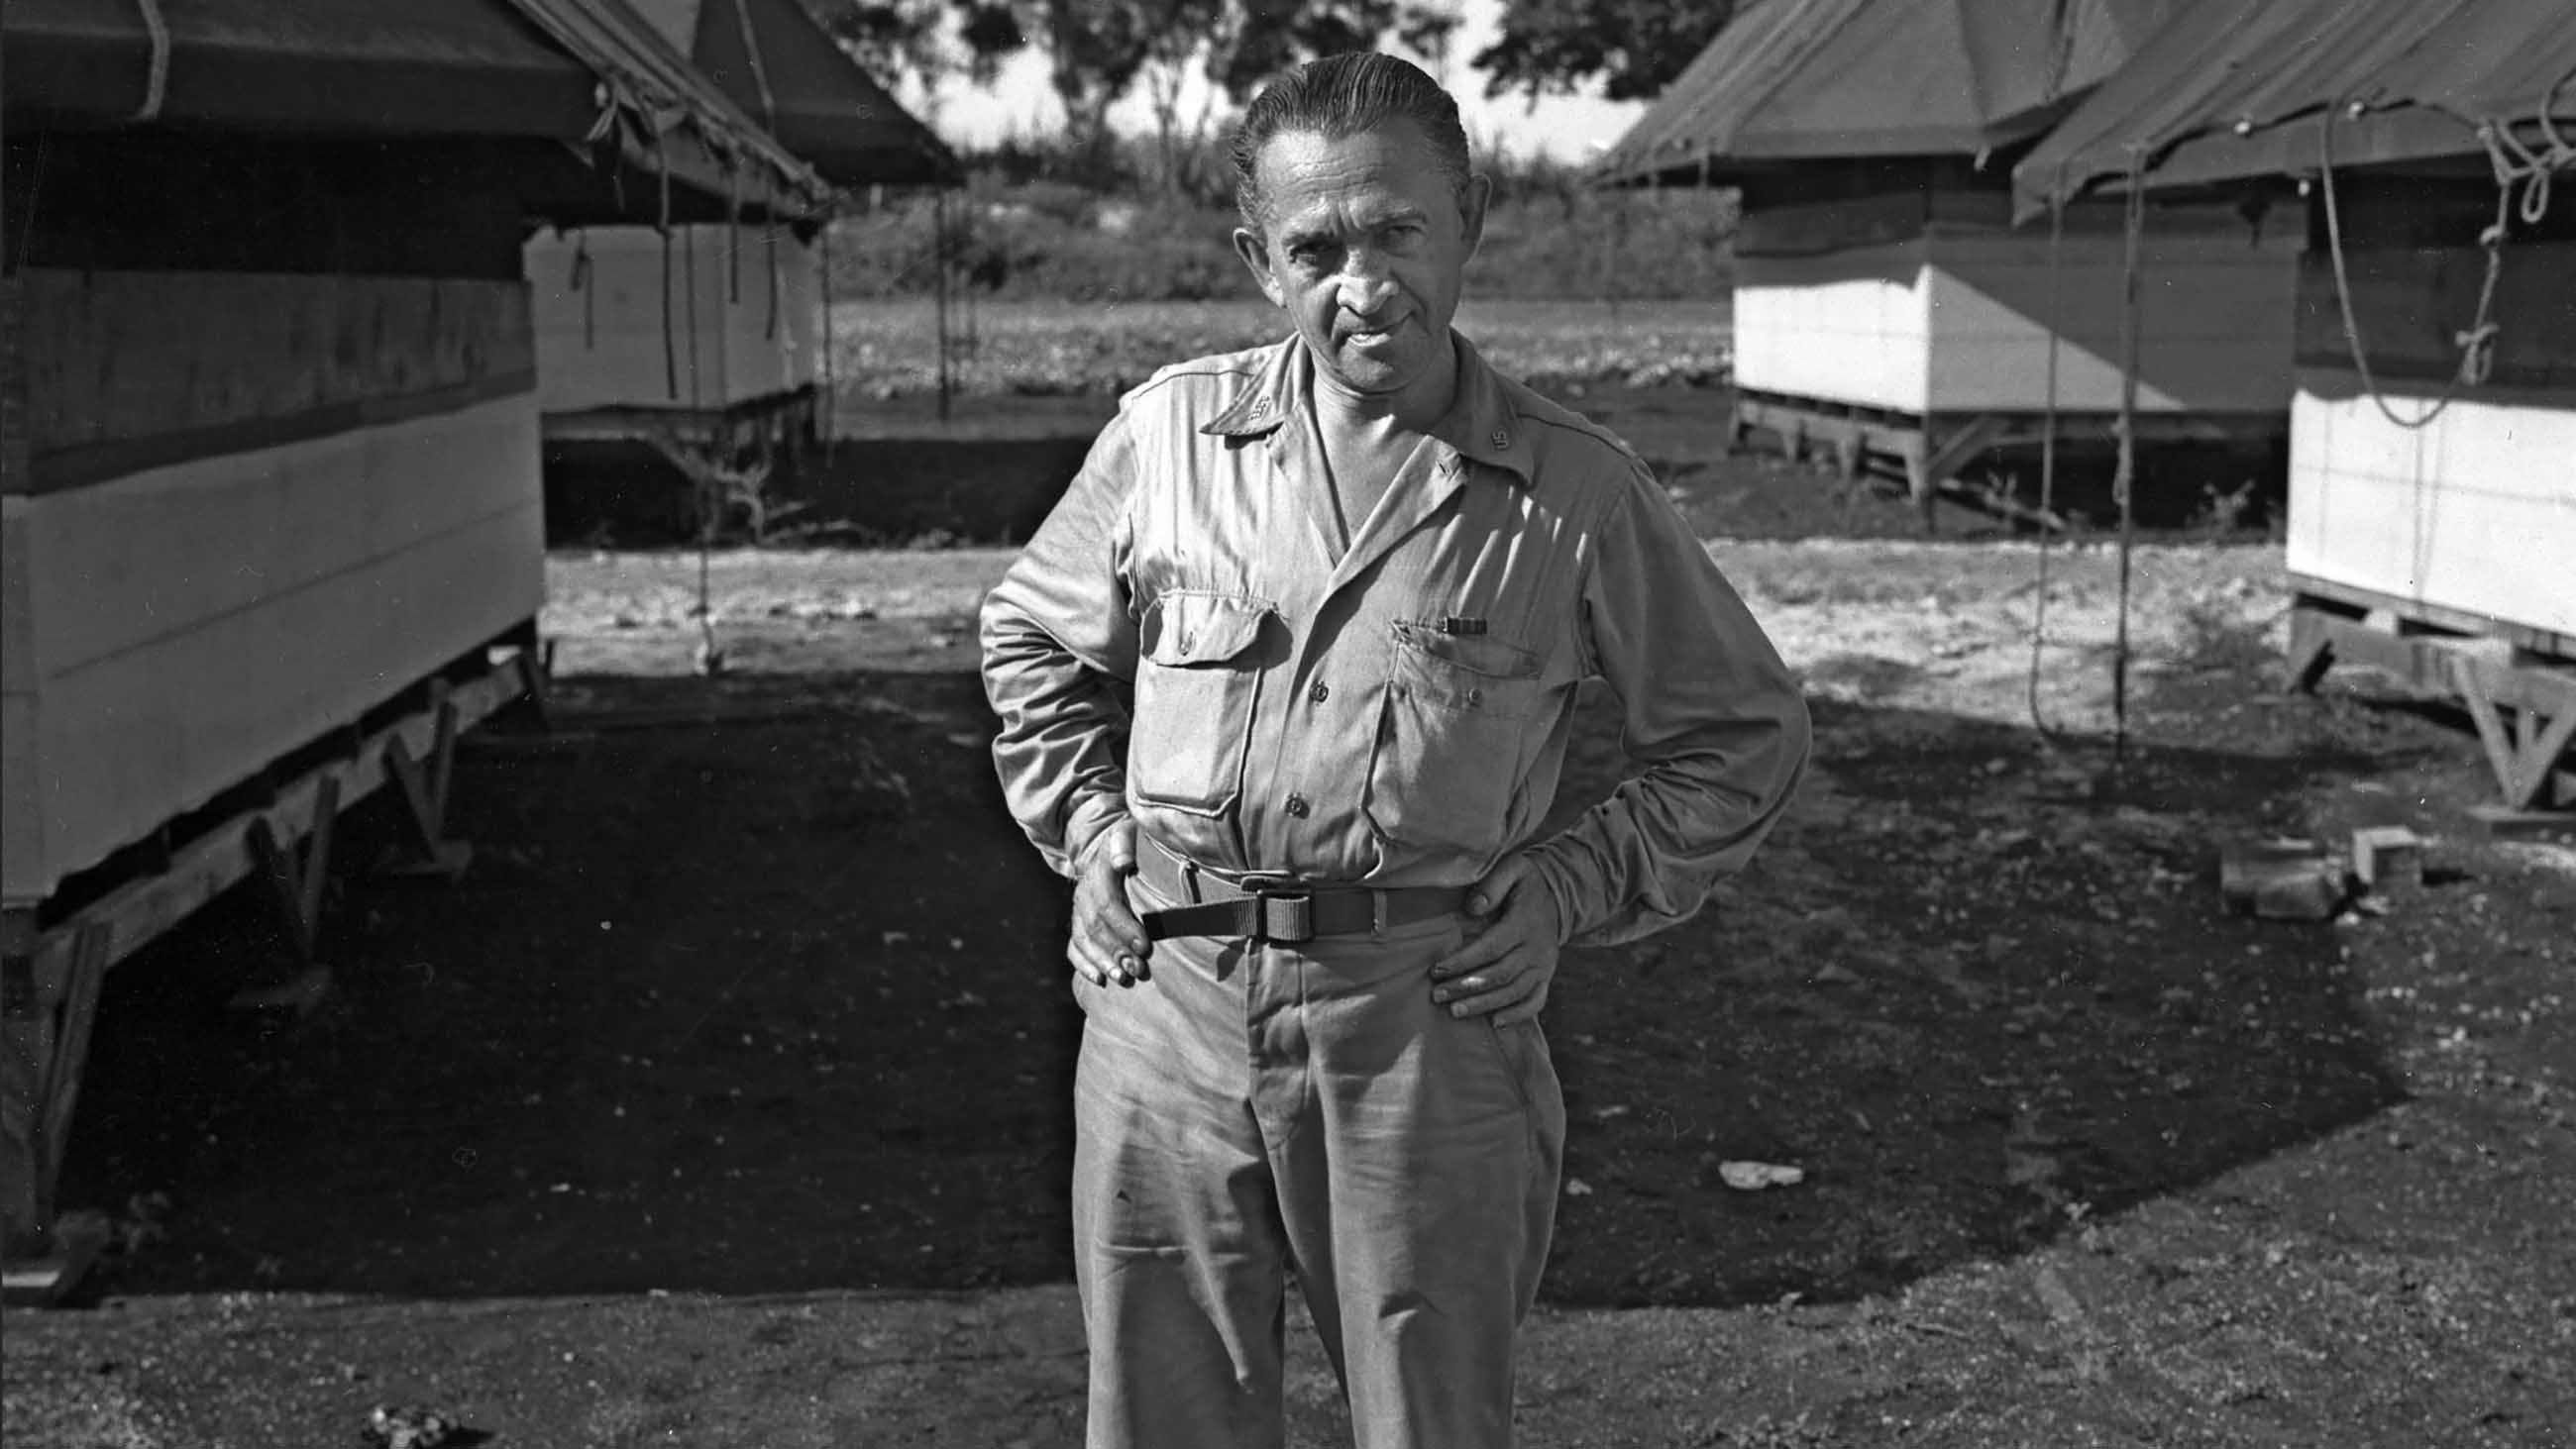 William L. "Atomic Bill" Laurence at Tinian Island in the Pacific, the launching point for the atomic bomb attacks against Hiroshima and Nagasaki.